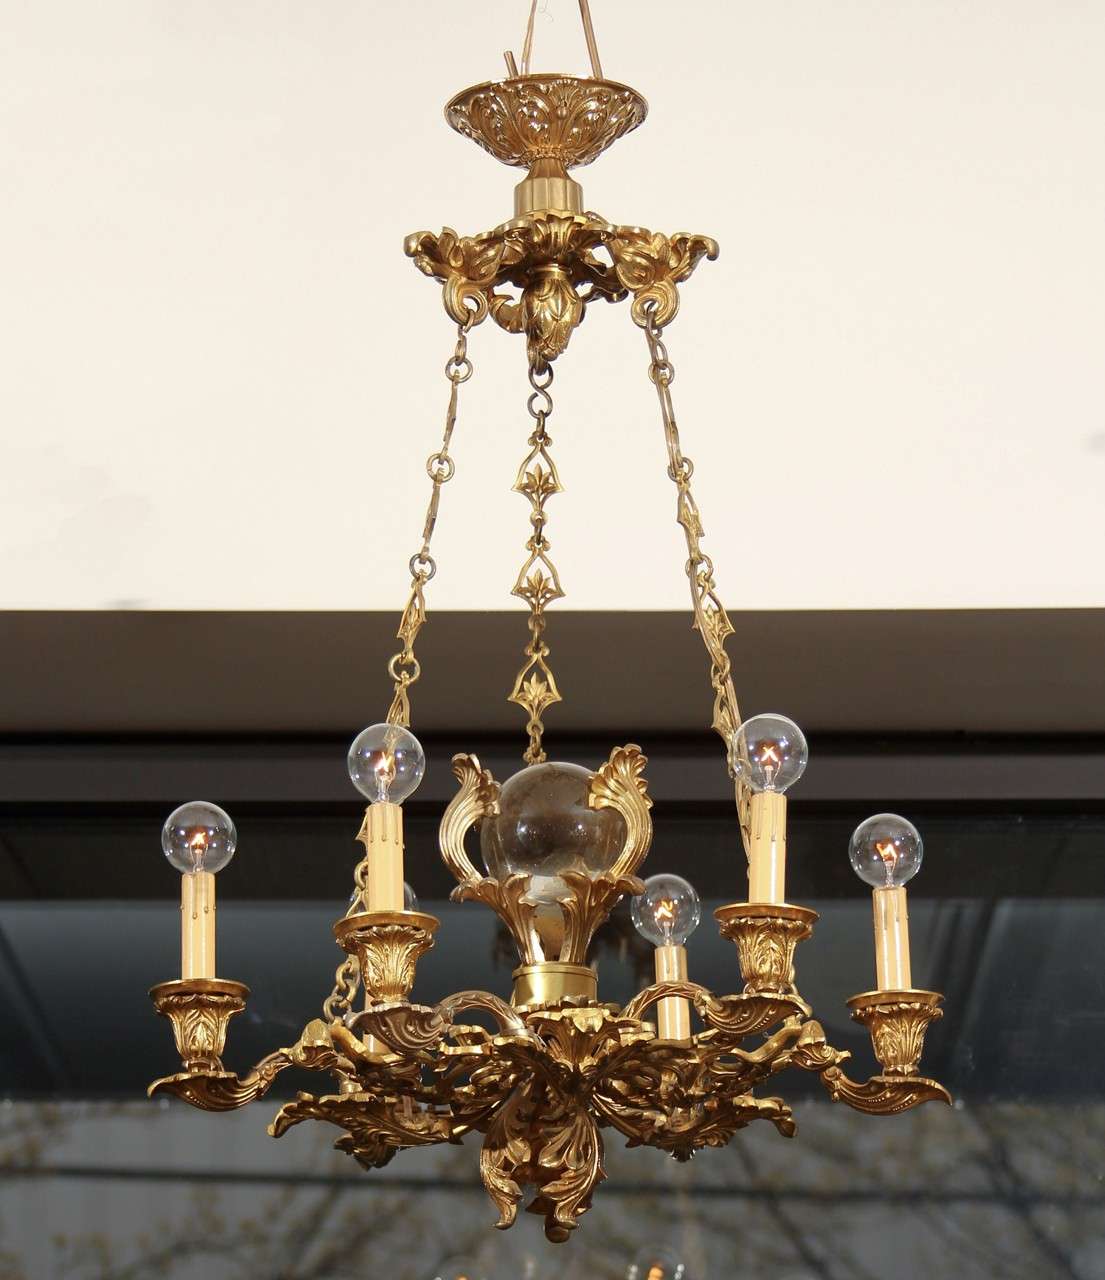 Beautifully detailed six-arm chandelier highlighted with large crystal orb.